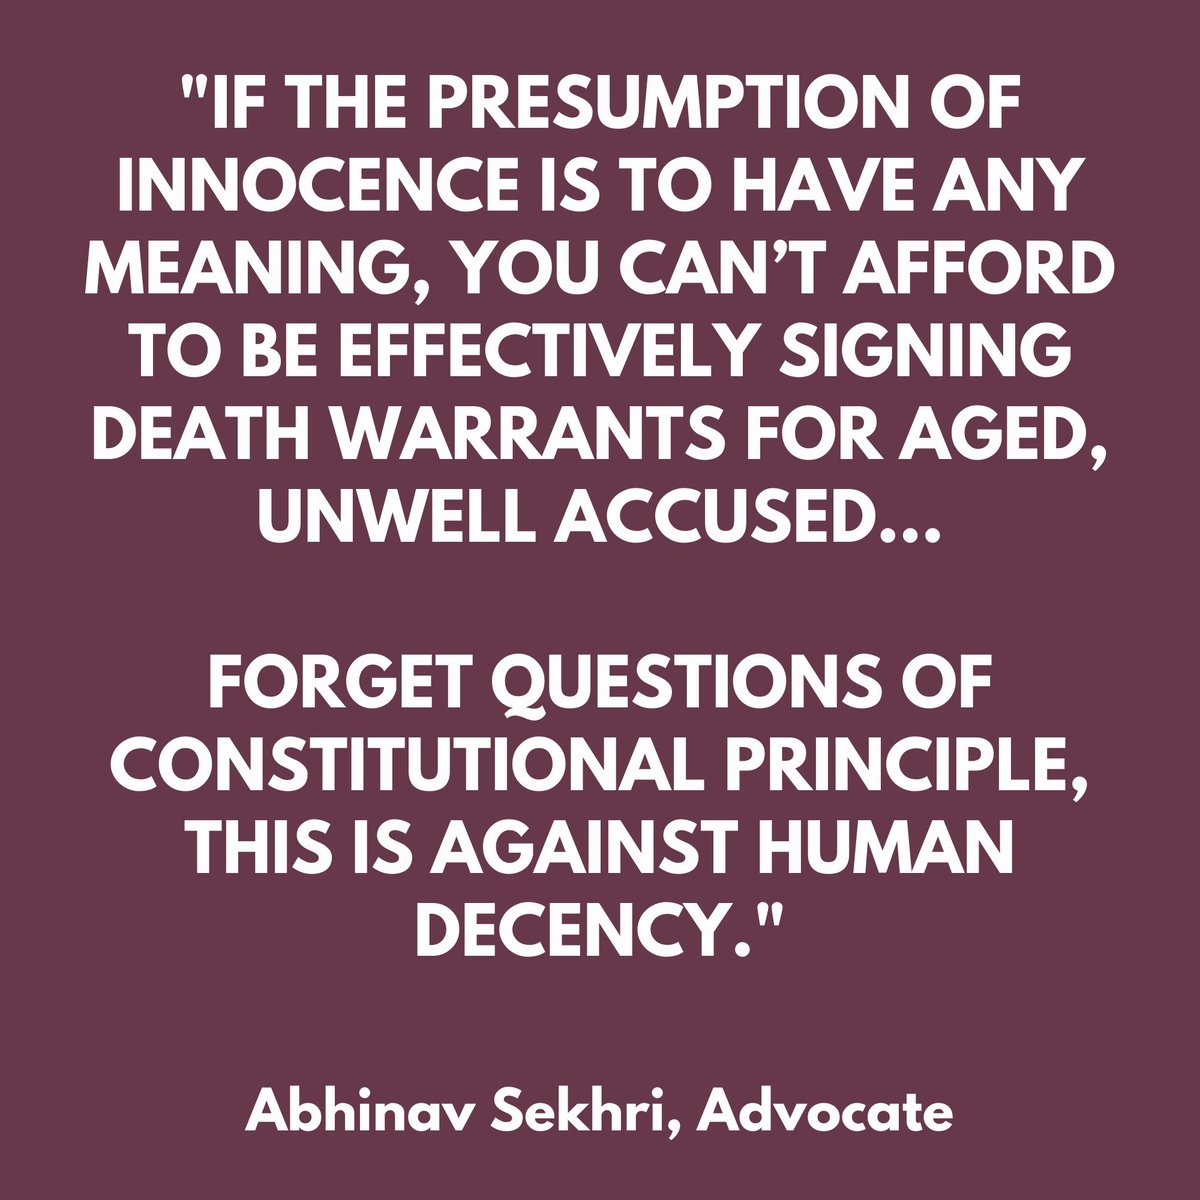 And Abhinav Sekhri on how the current approach of the courts ignores not just law. 3/n @TheQuint